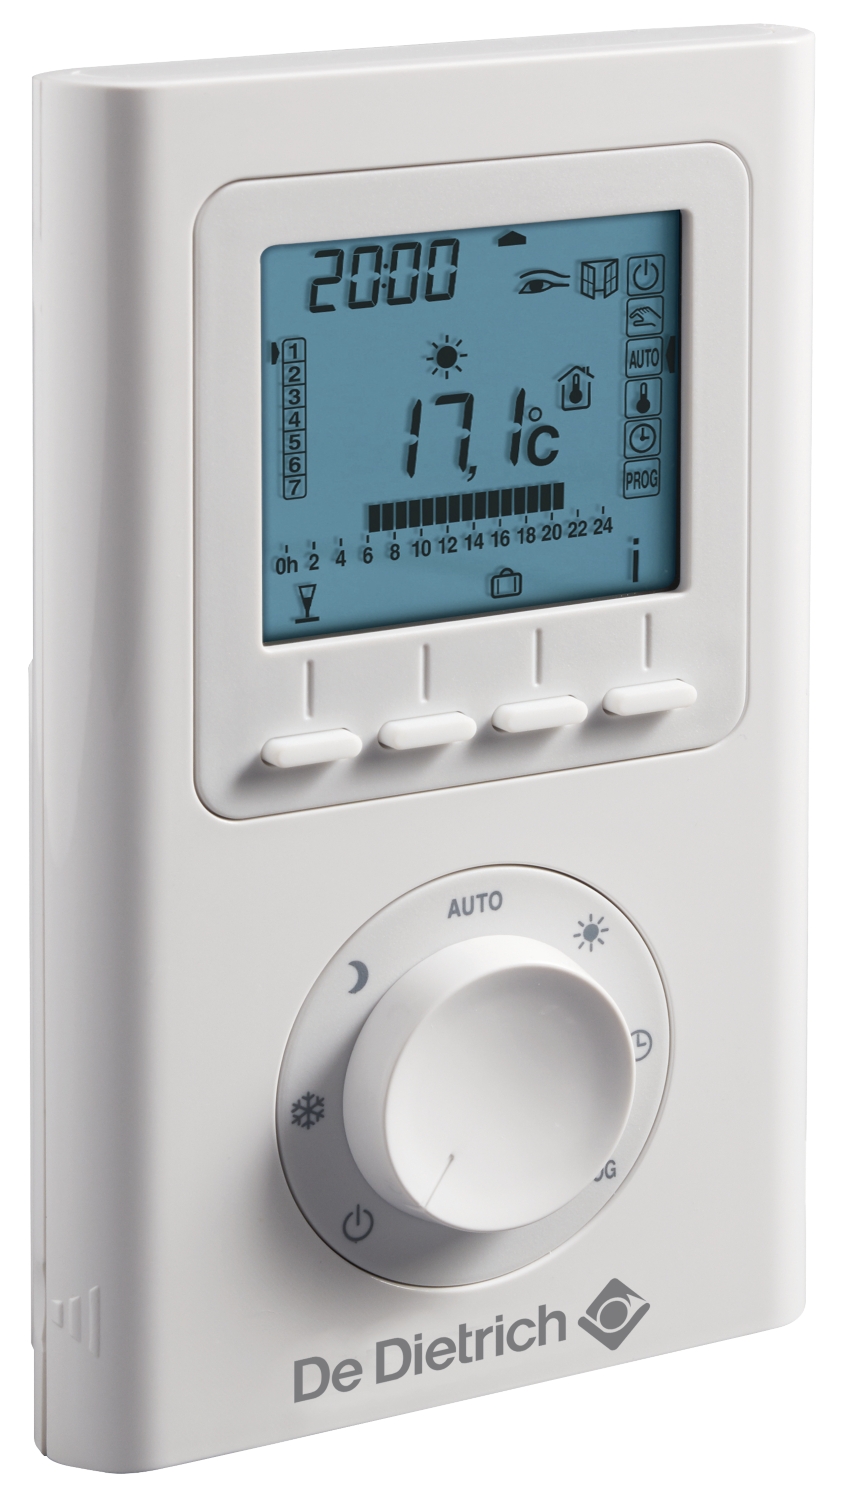  Thermostat digital programmable - Colis AD337 